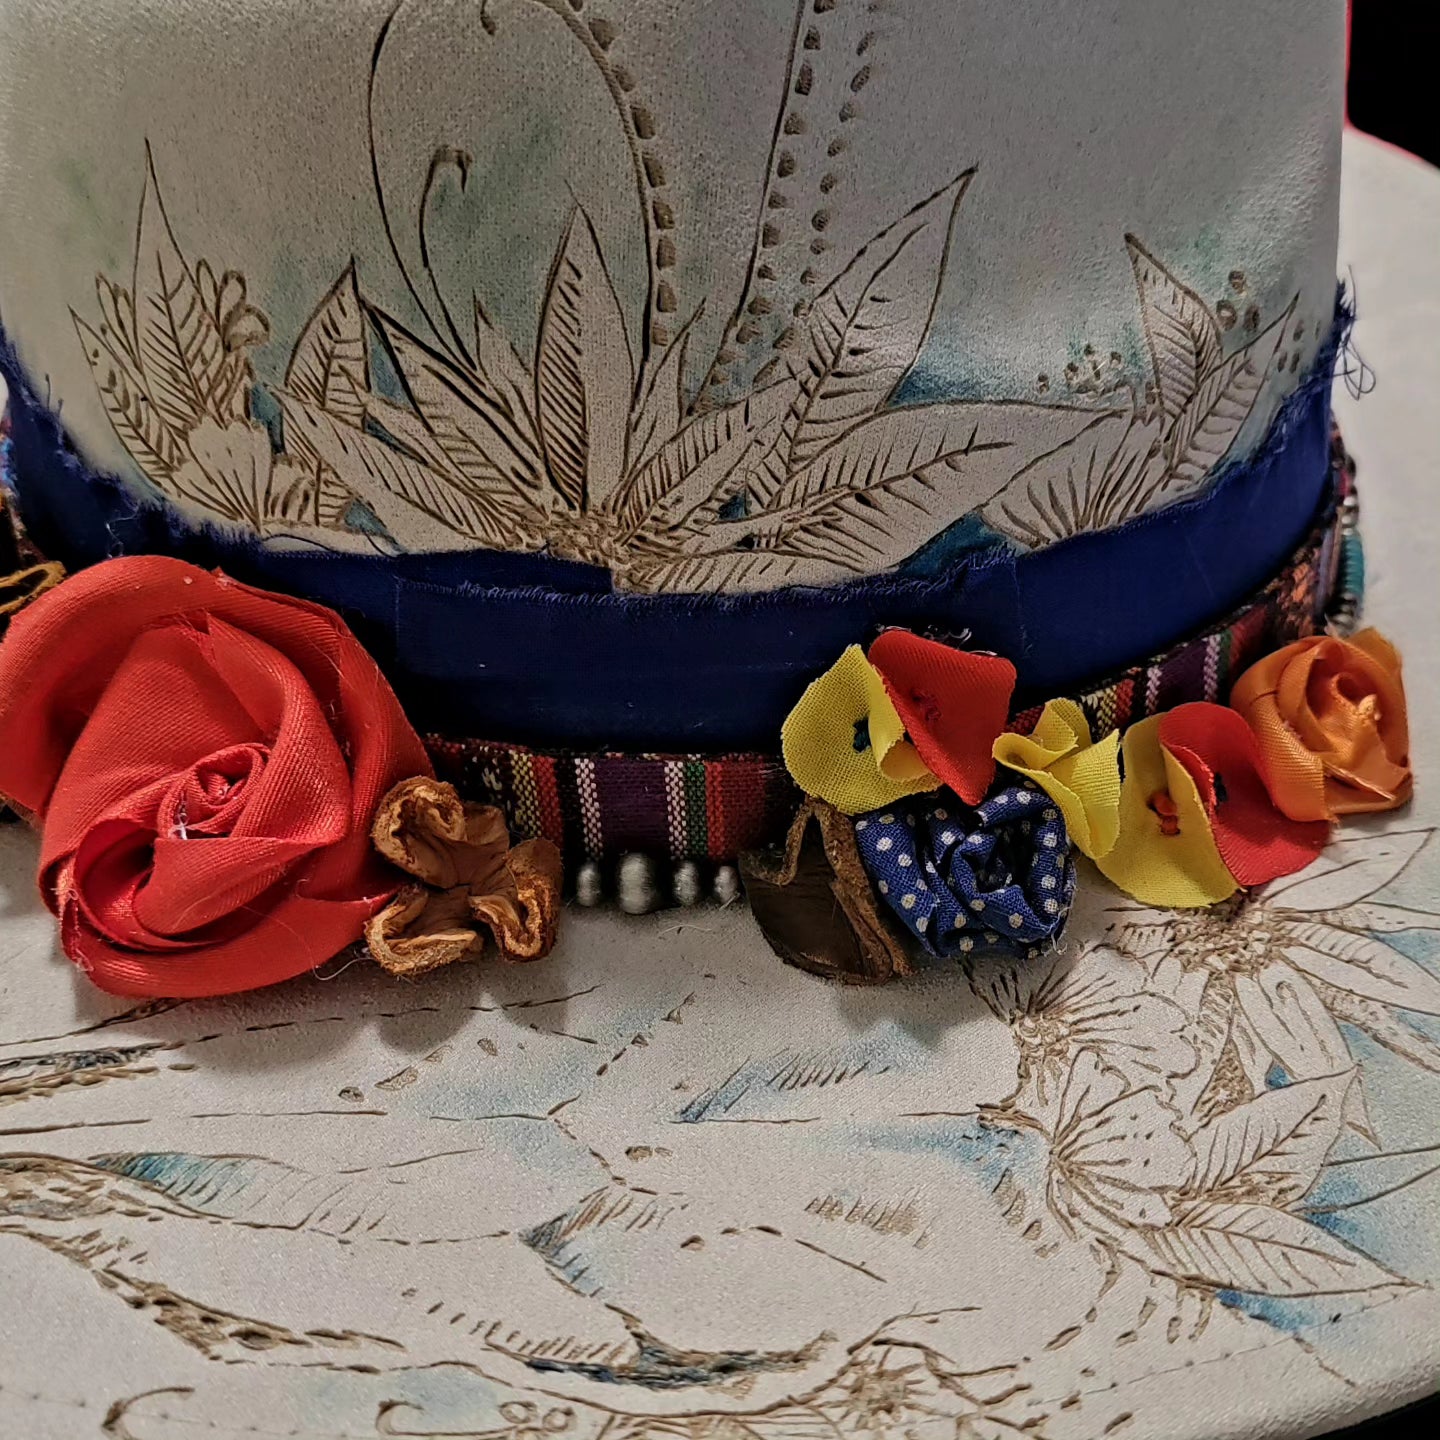 Hat- Hand Painted Felt with flowers